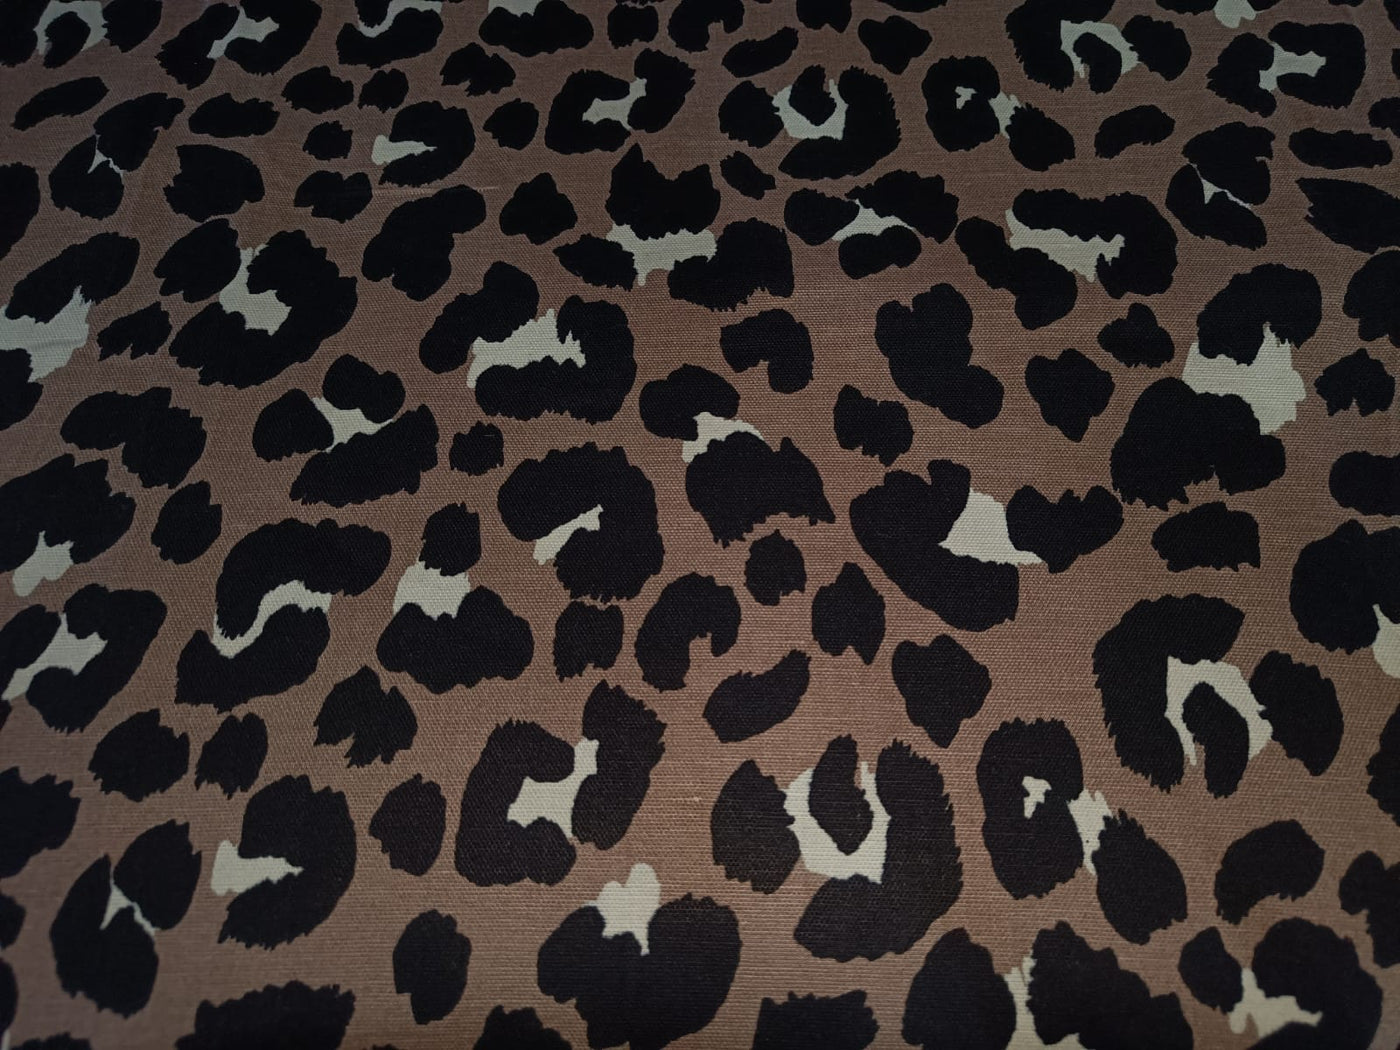 100% Linen fabric printed with cheetah design 58" wide